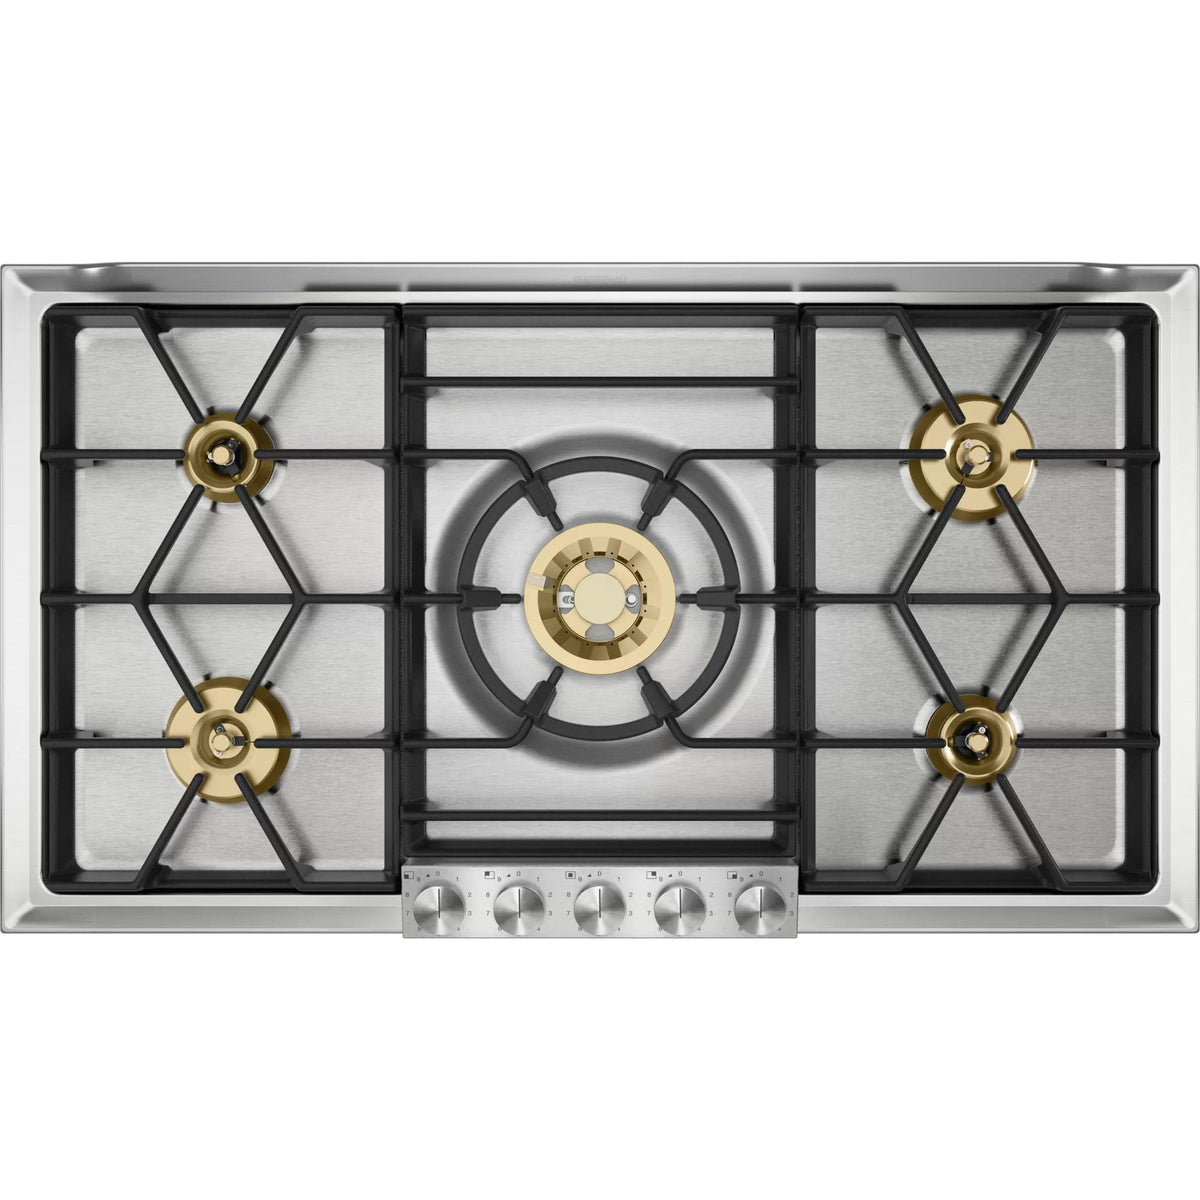 36-inch Built-in Gas Cooktop with Wok Burner VG295250CA IMAGE 1